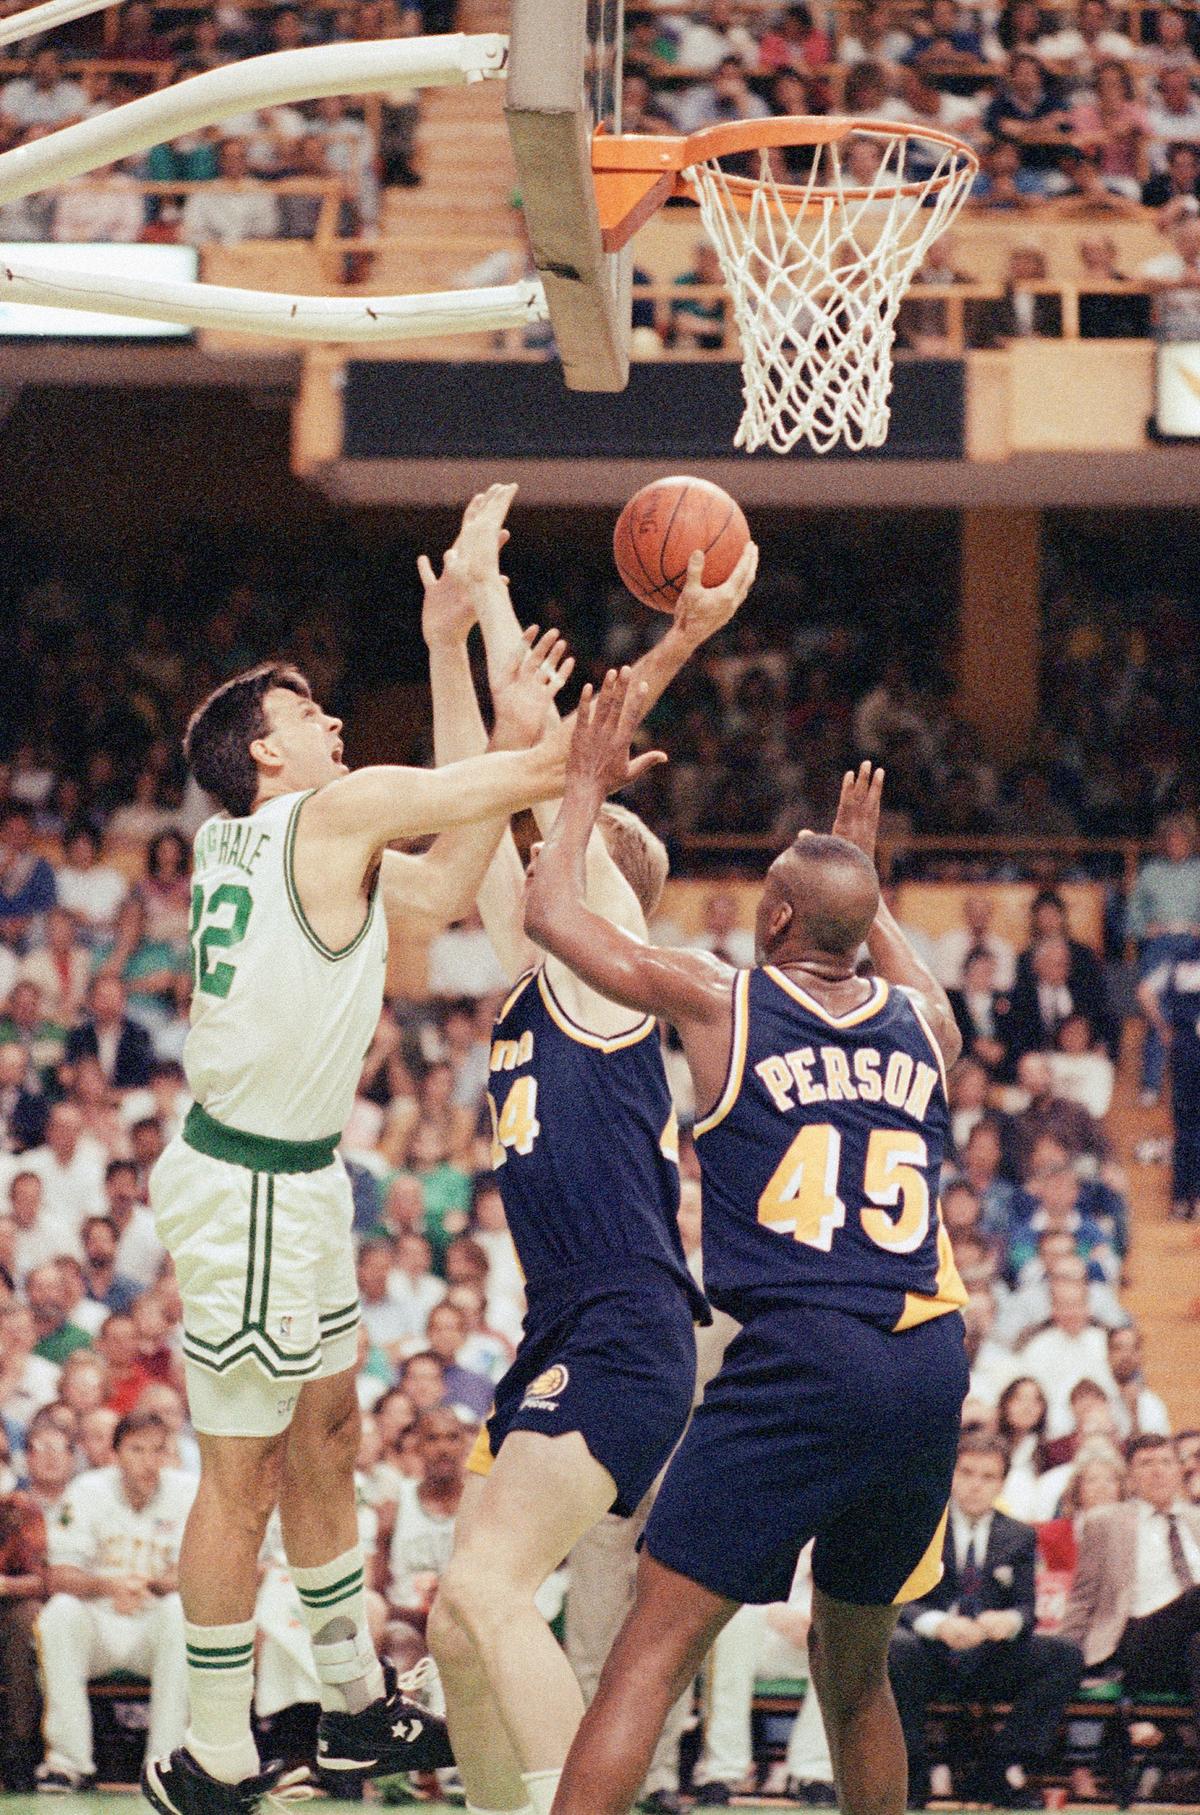 Ex-NBA Player John Amaechi Says Kevin McHale Had Best Post Moves